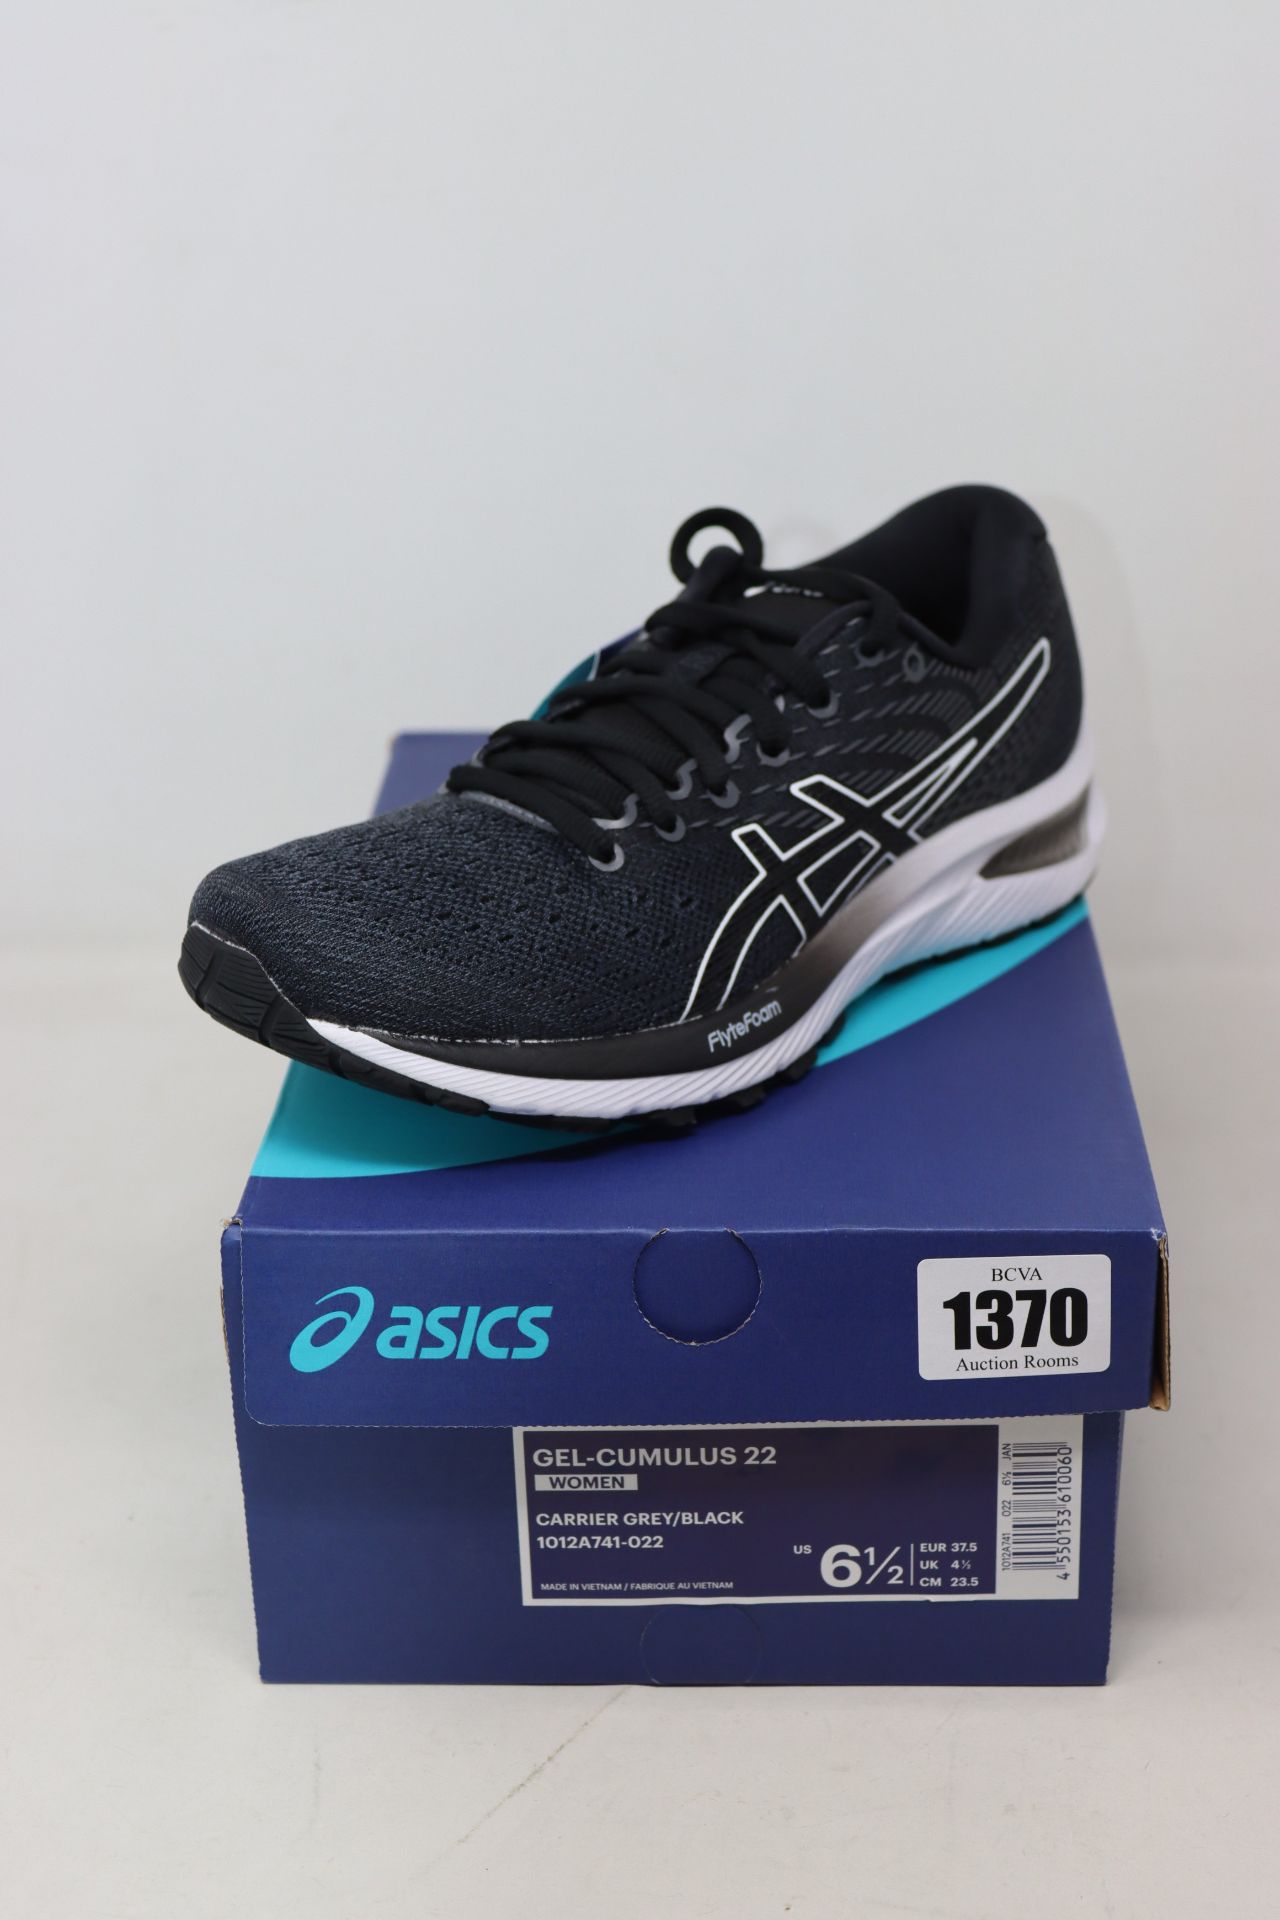 A pair of women's as new Asics Gel-cumulus 22 trainers (UK 4.5).